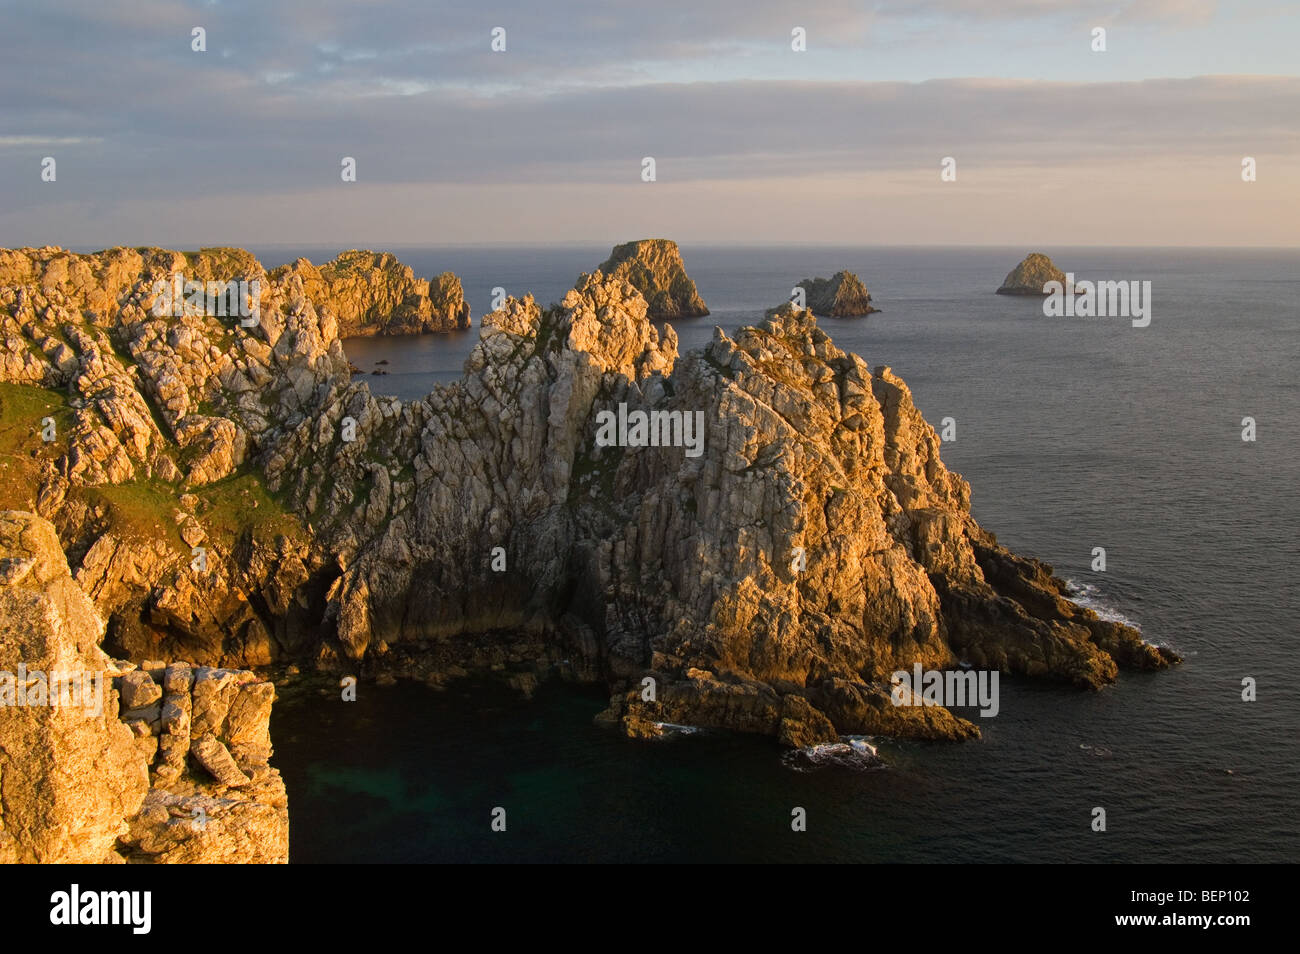 Sea cliffs at sunset at the Pointe de Pen-Hir, Finistère, Brittany, France Stock Photo